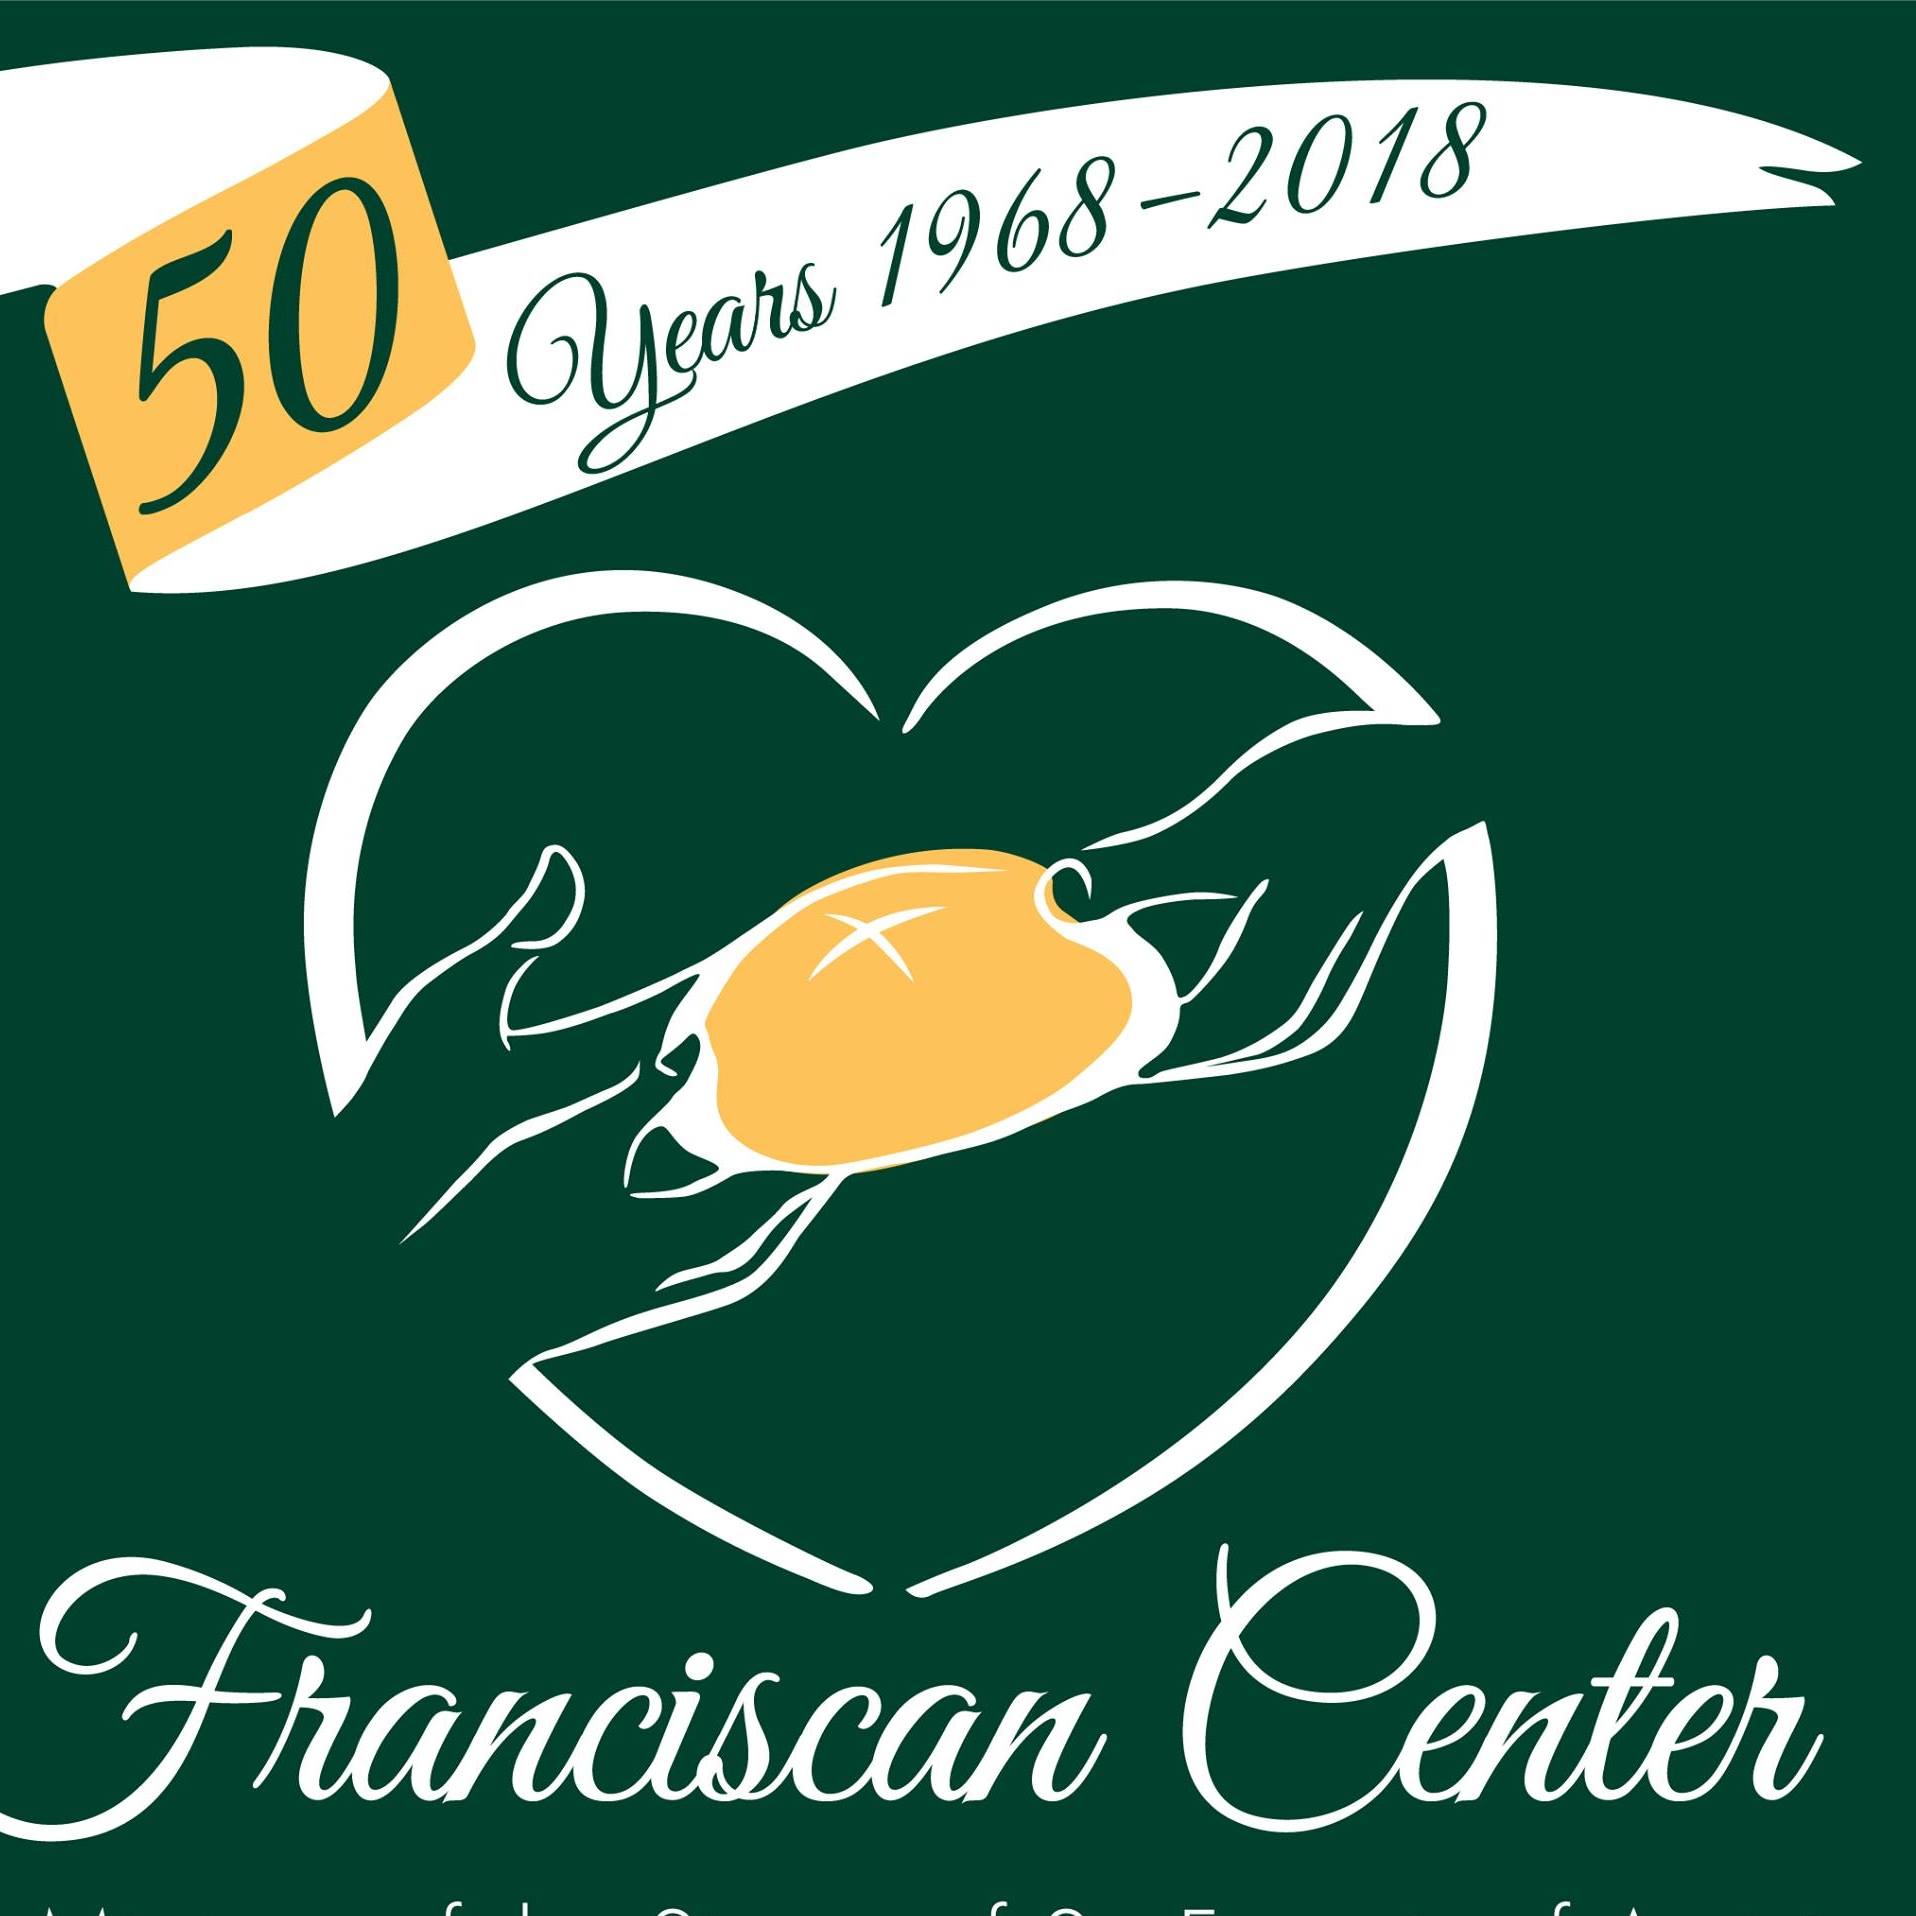 Franciscan Center Baltimore Food Pantry and Emergency Services